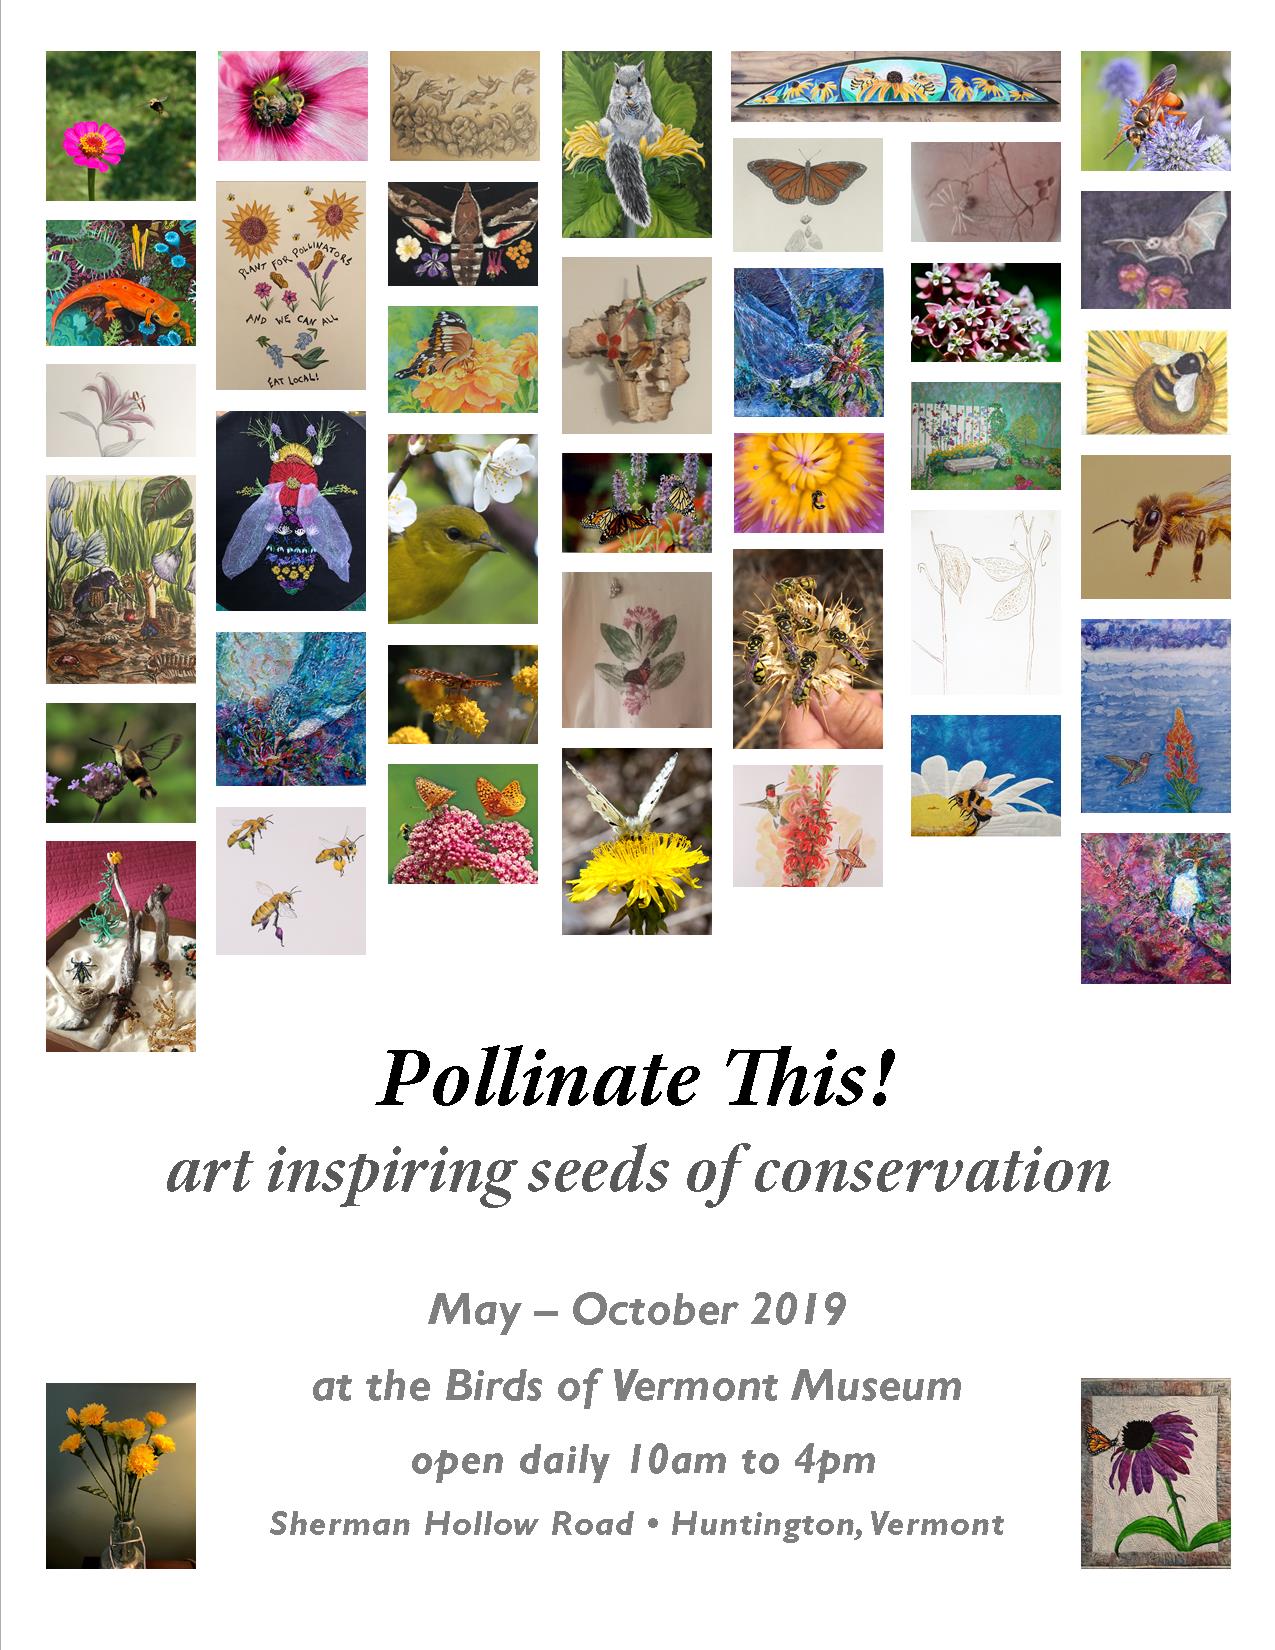 Thumbnails of art accepted for Pollinate This show